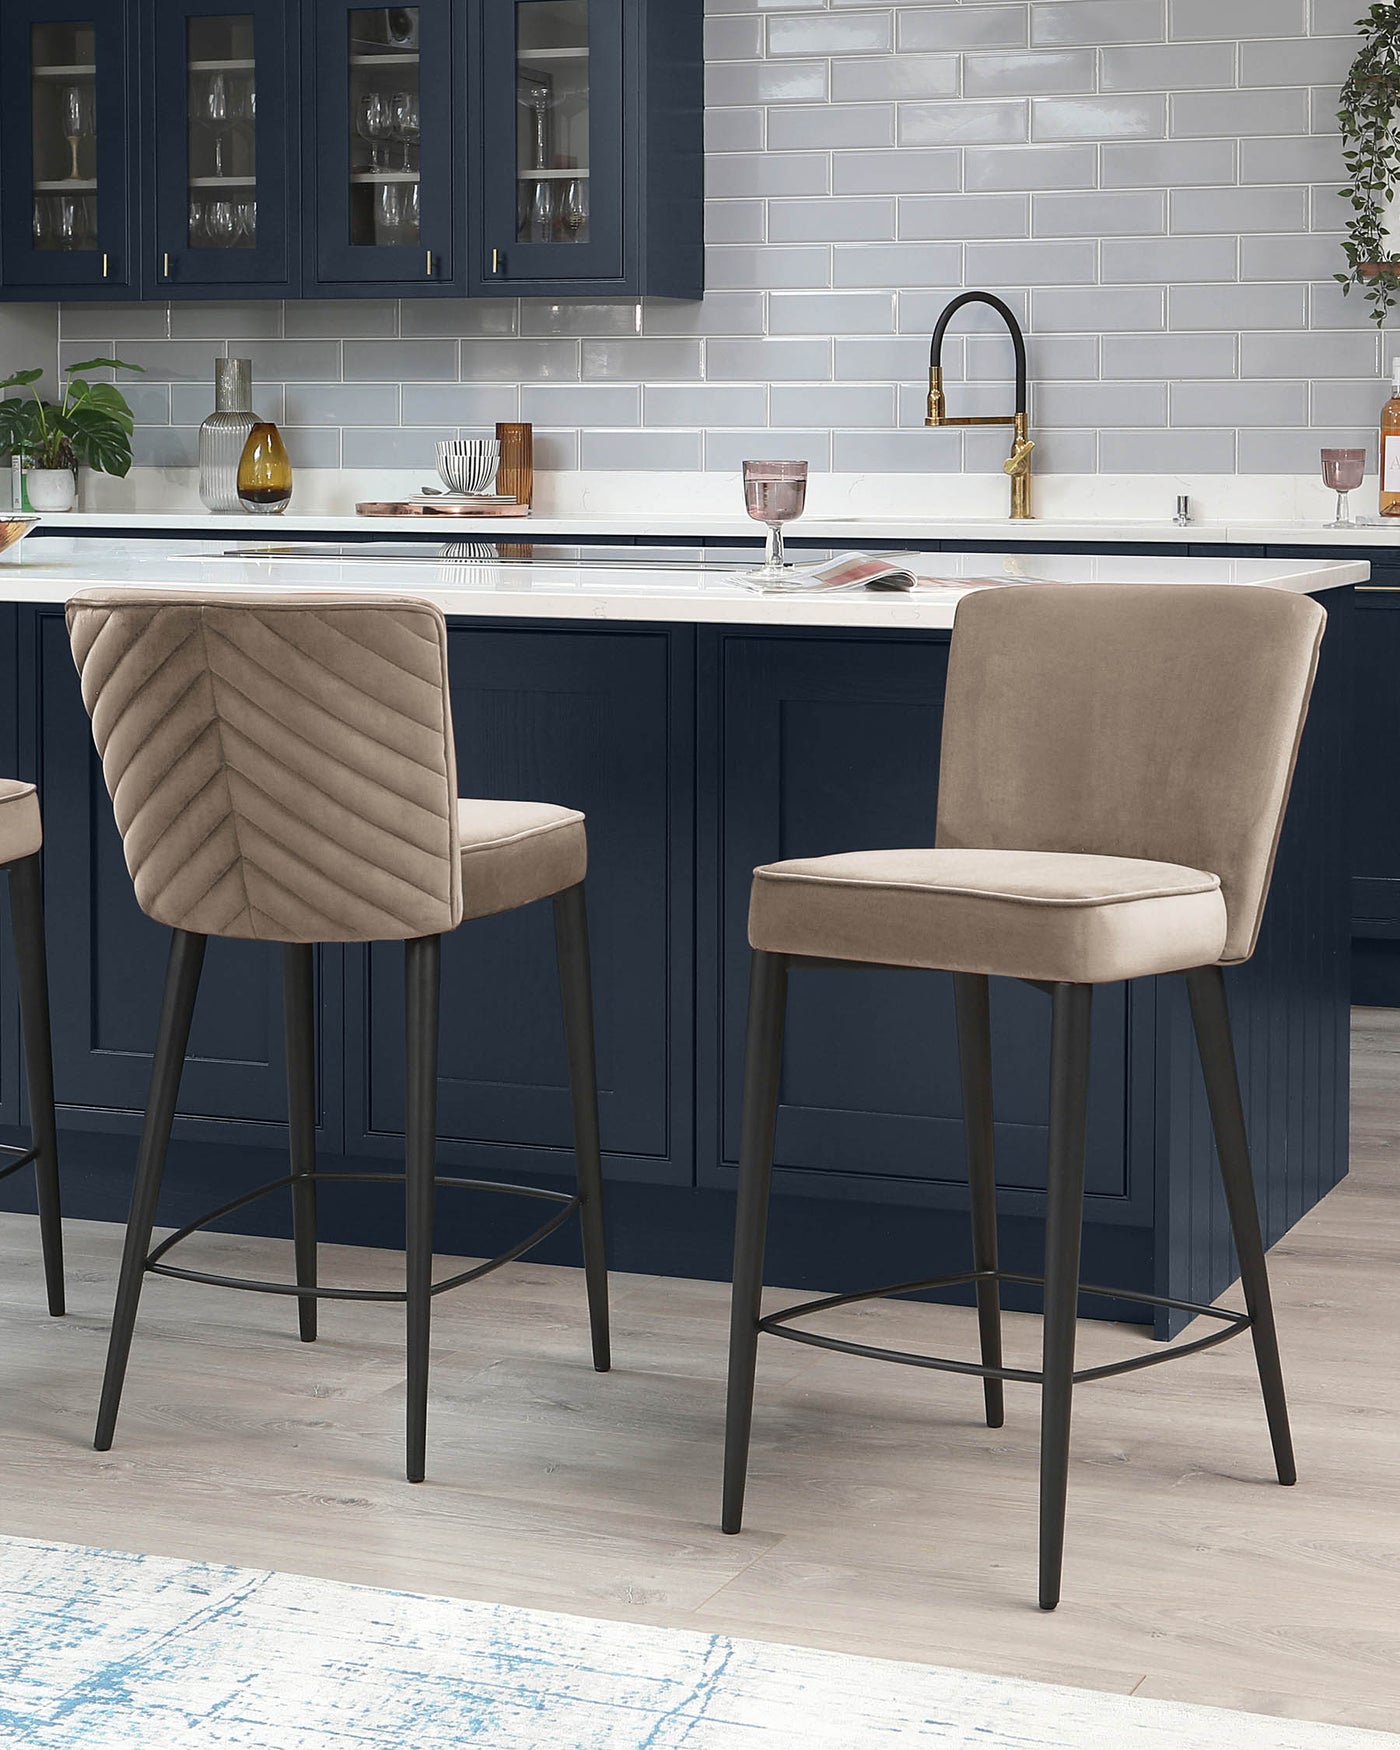 Two contemporary upholstered bar stools with channel tufting on the backrests, featuring a neutral beige fabric and slender black metal legs with footrest bars.